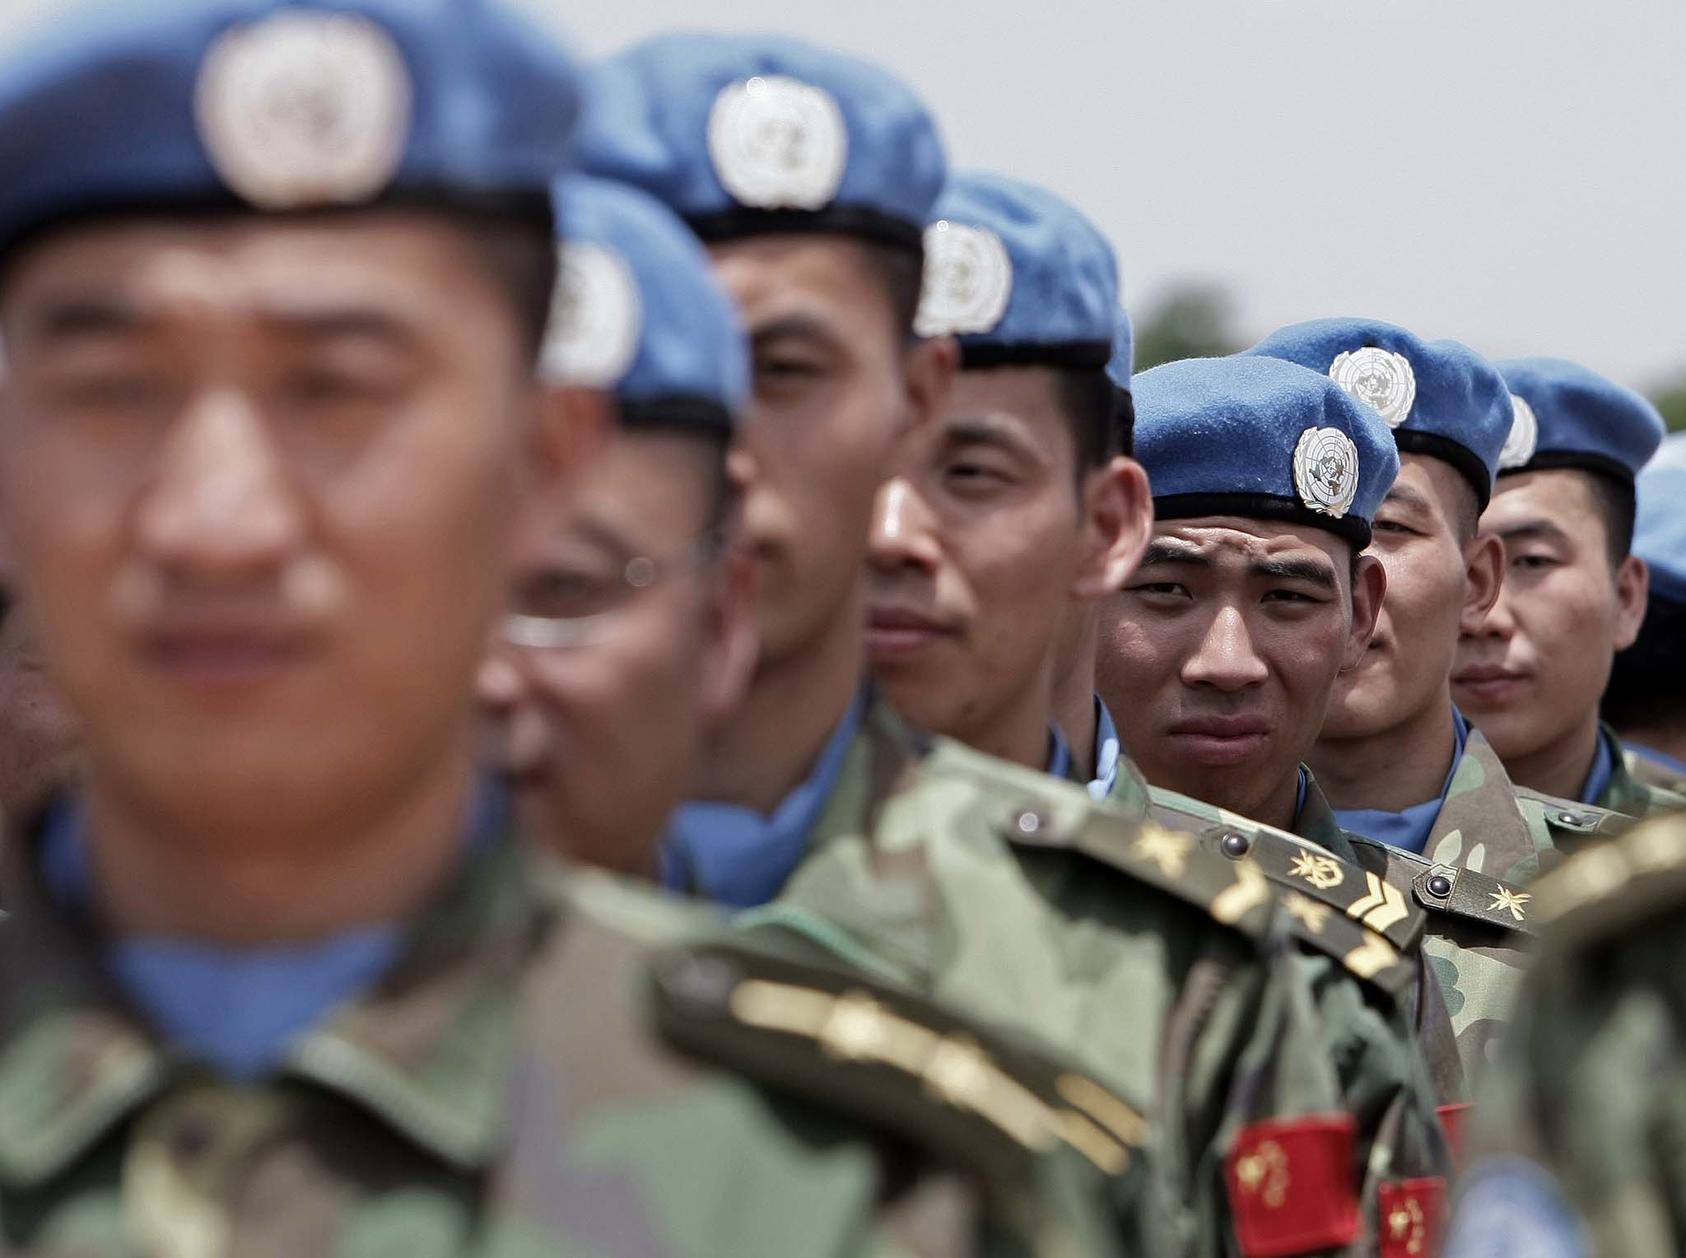 Newly arrived engineers from China serving with the United Nations-African Union Mission in Darfur (UNAMID) arriving in Nyala, South Darfur, July 17, 2008. (U.N. Photo/Stuart Price)